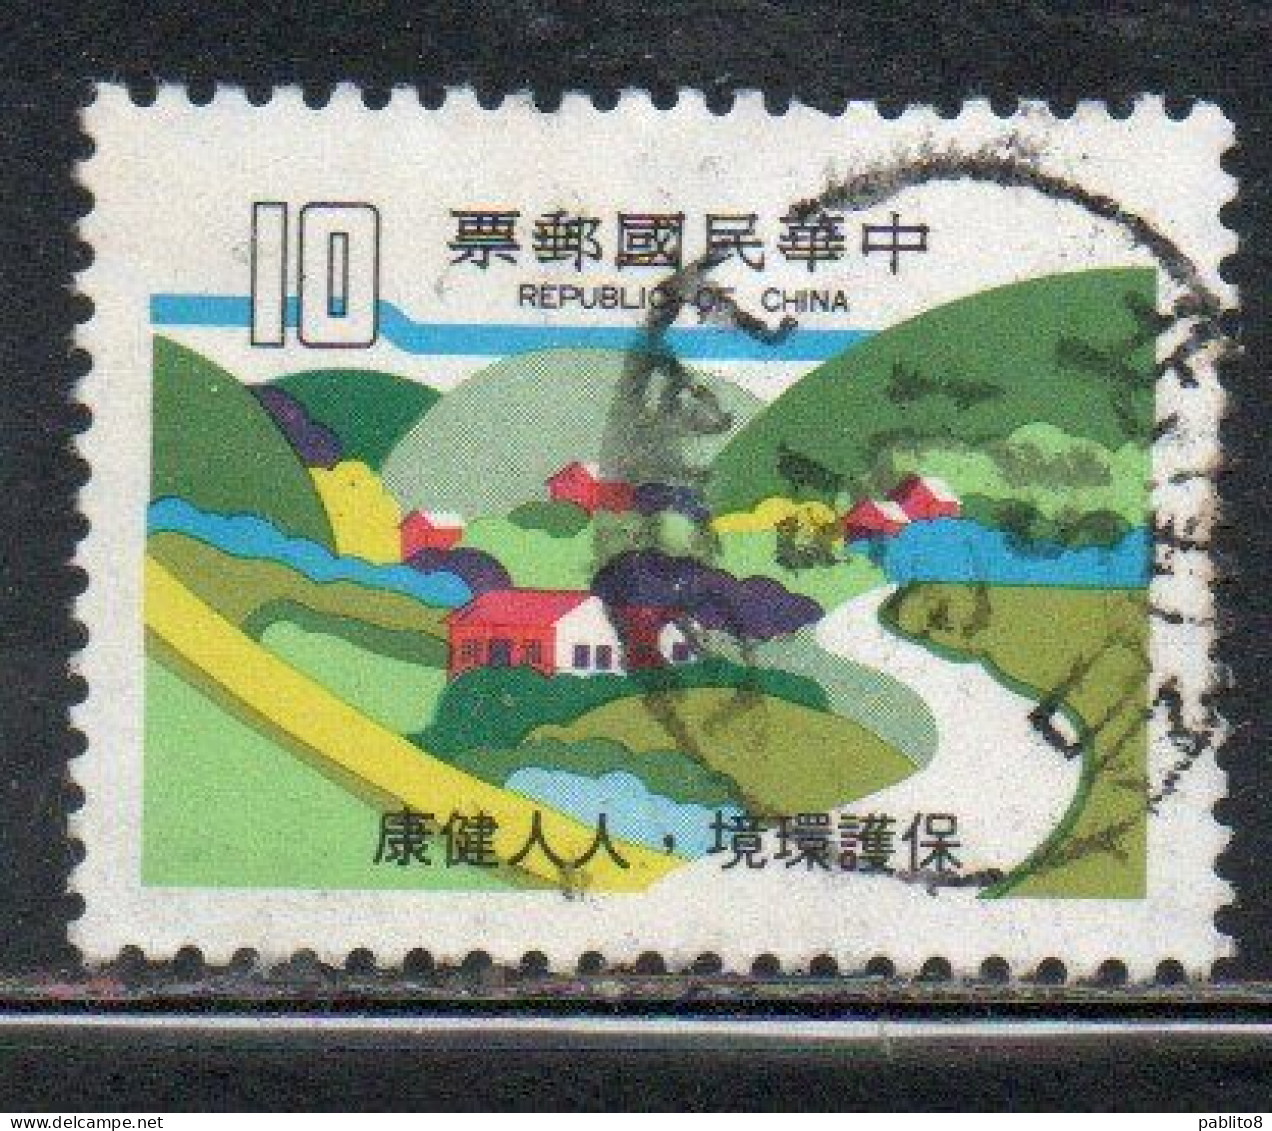 CHINA REPUBLIC CINA TAIWAN FORMOSA 1979 PROTECTION OF THE ENVIRONMENT RURAL LANDSCAPE 10$ USED USATO OBLITERE' - Used Stamps